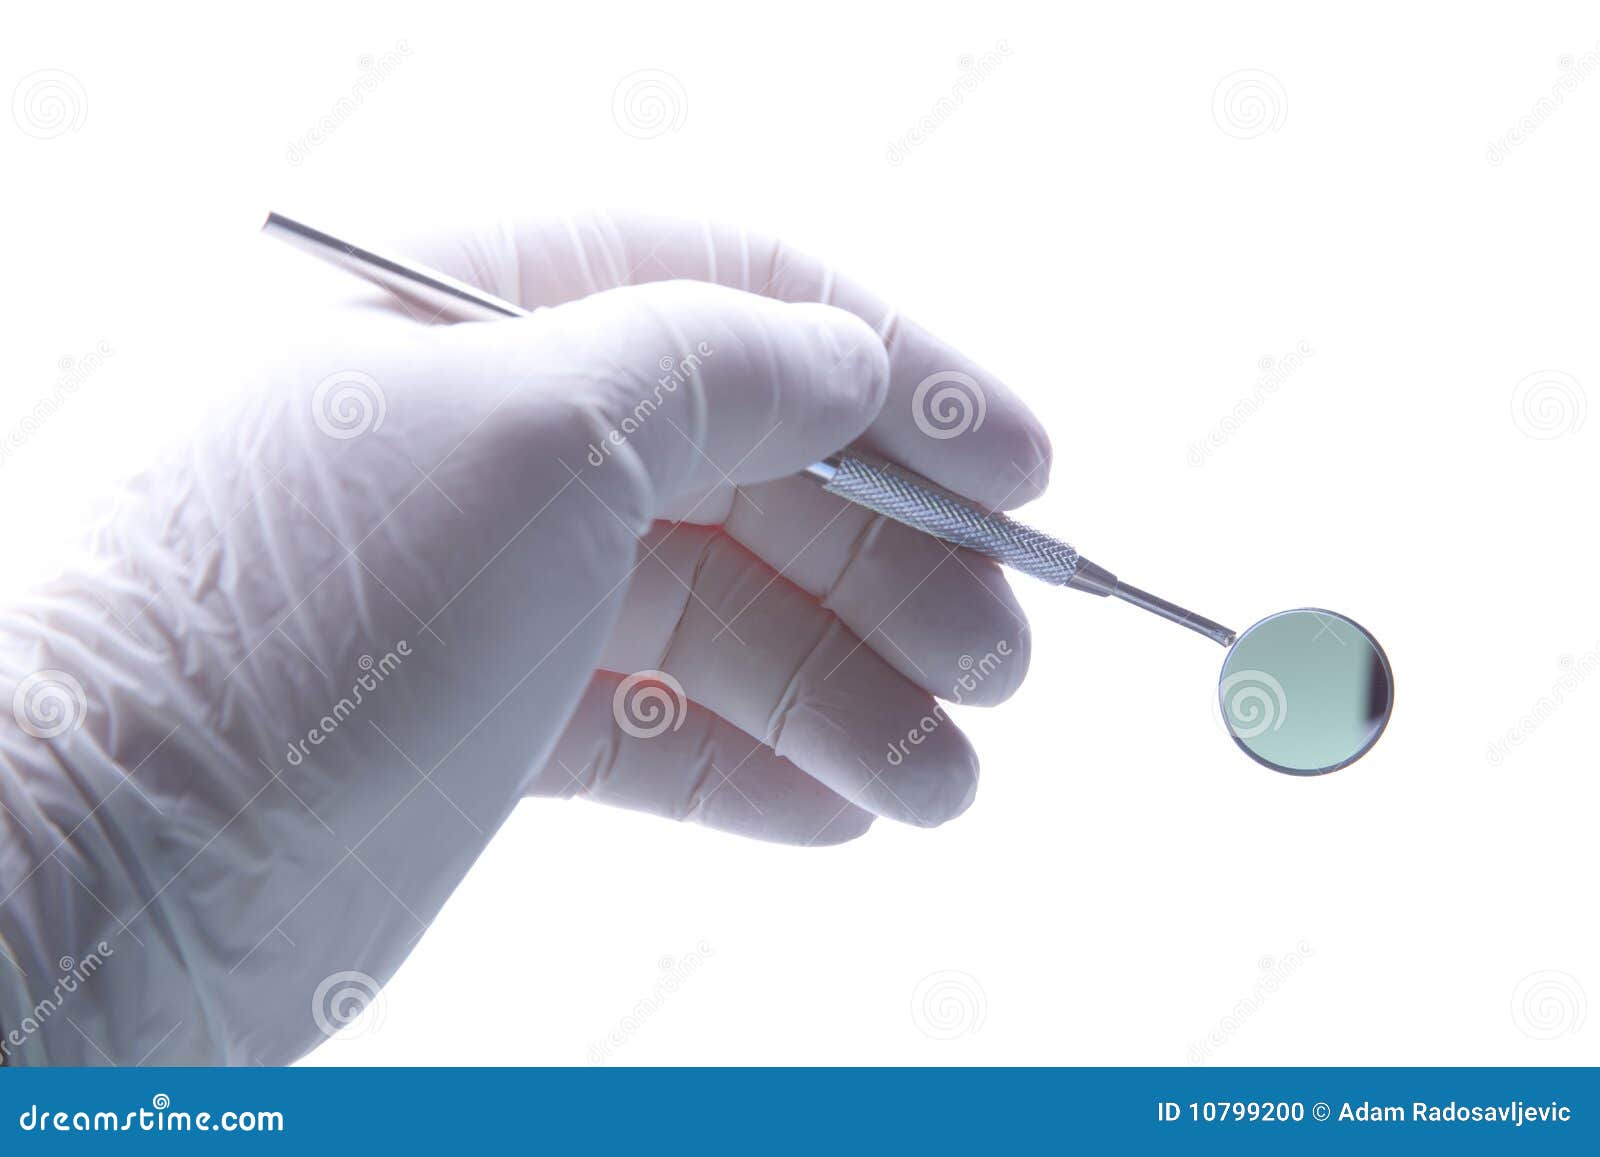 dentist hand gloved hold angled mirror